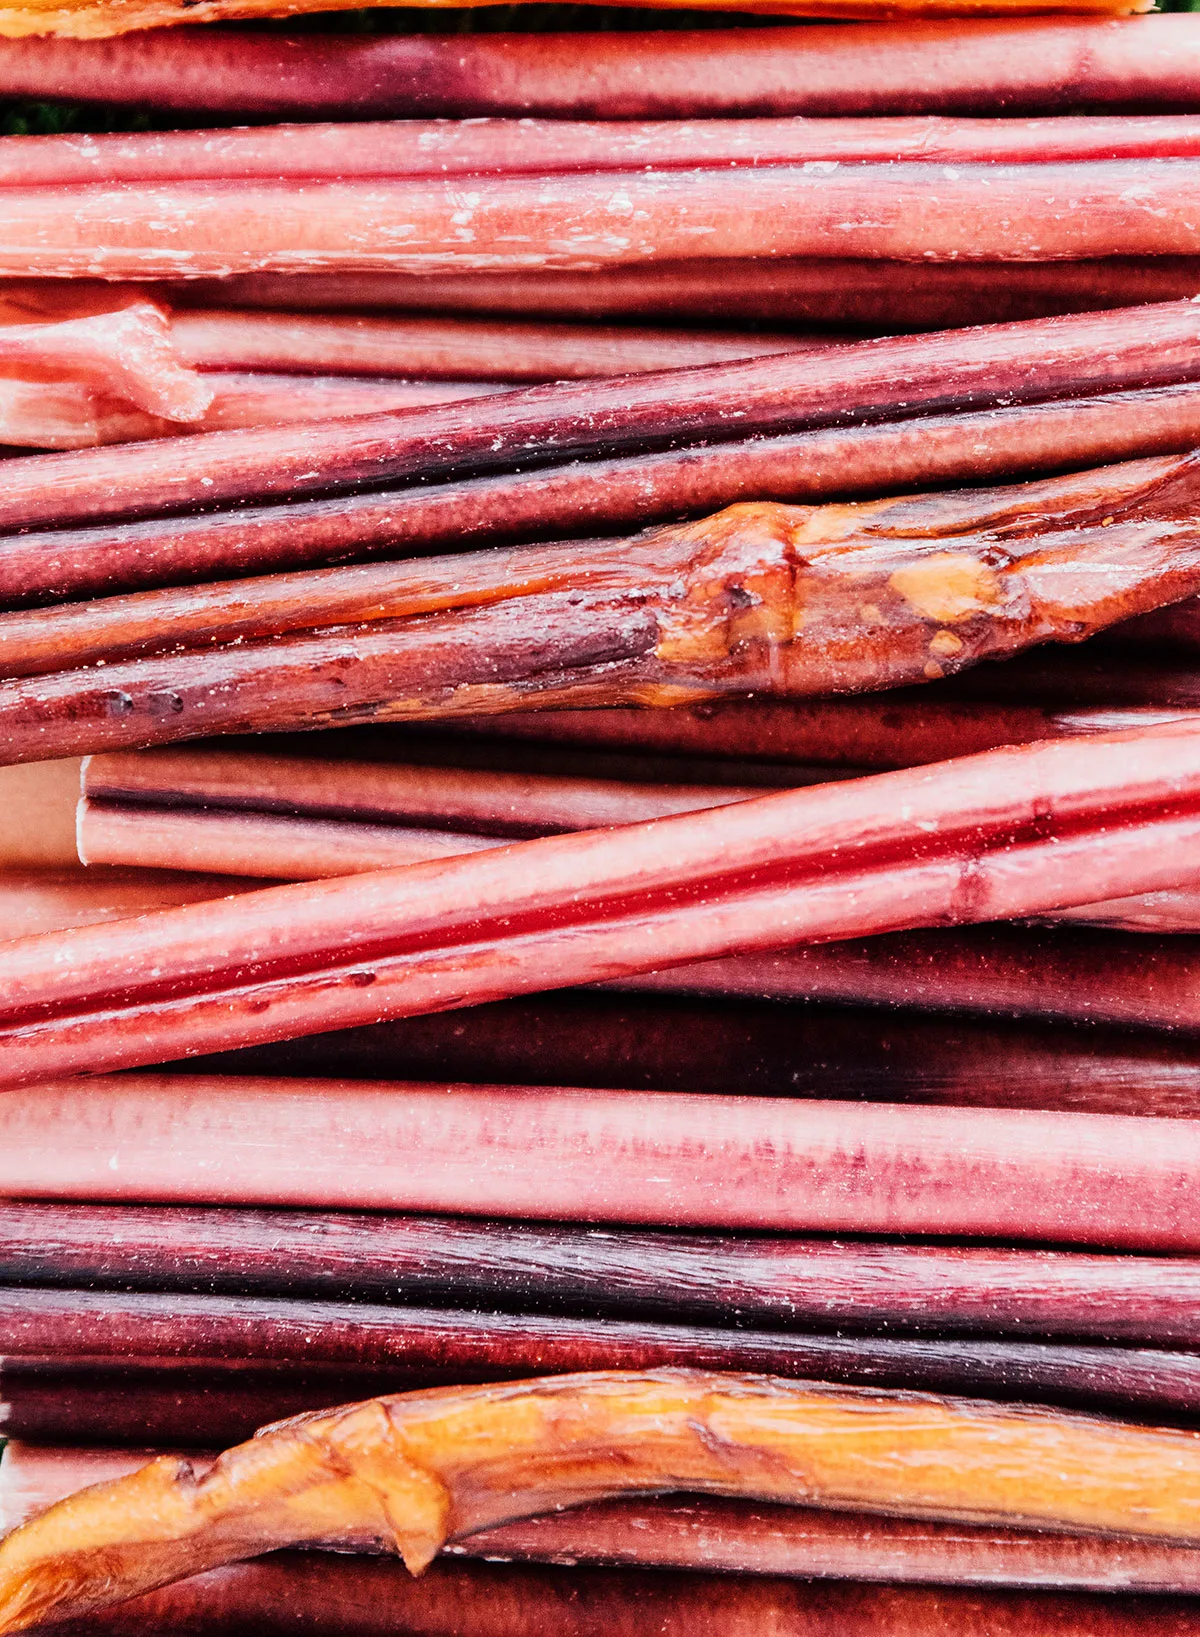 Up close image of bully sticks that are reddish brown in color and resemble sticks.